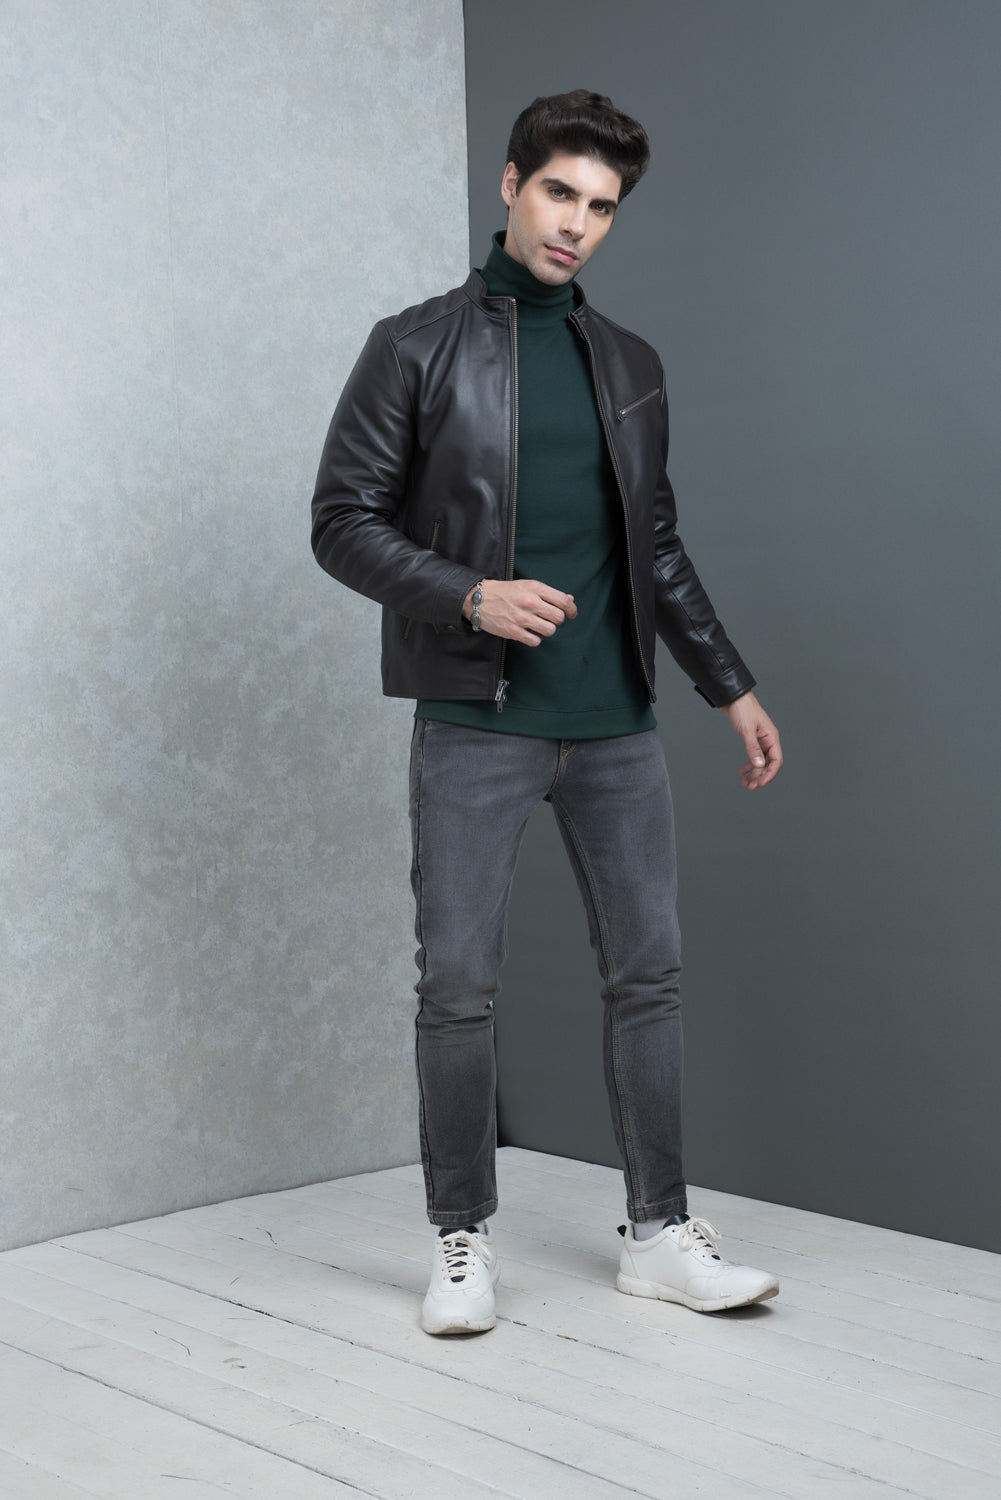 Justanned Casual Moto Jacket